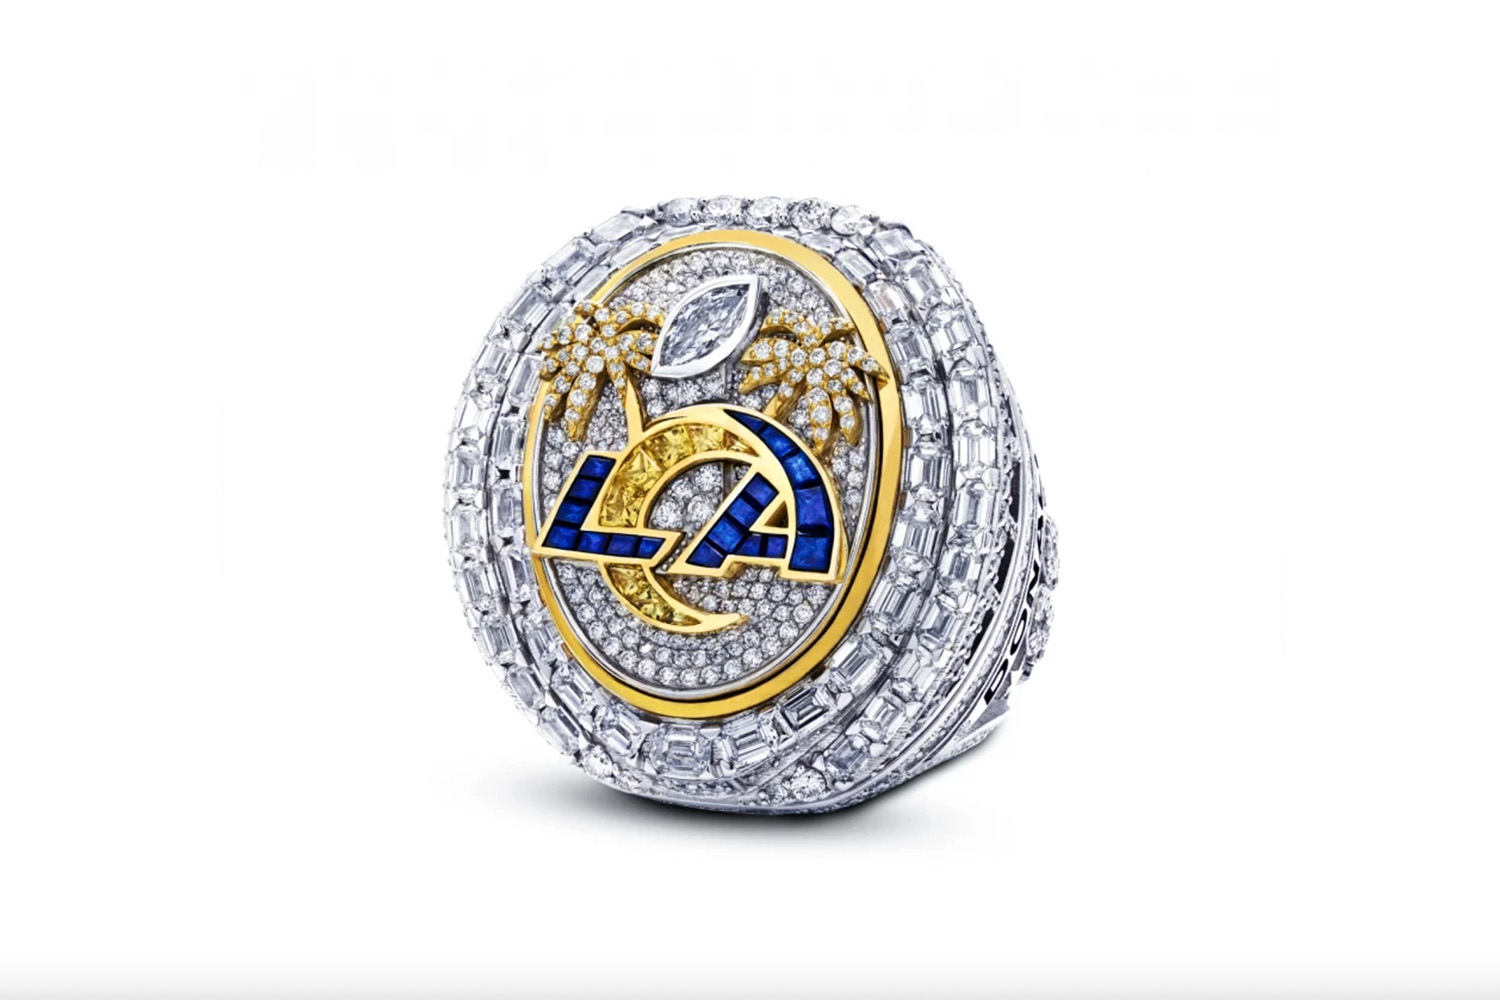 tom brady's most expensive super bowl ring